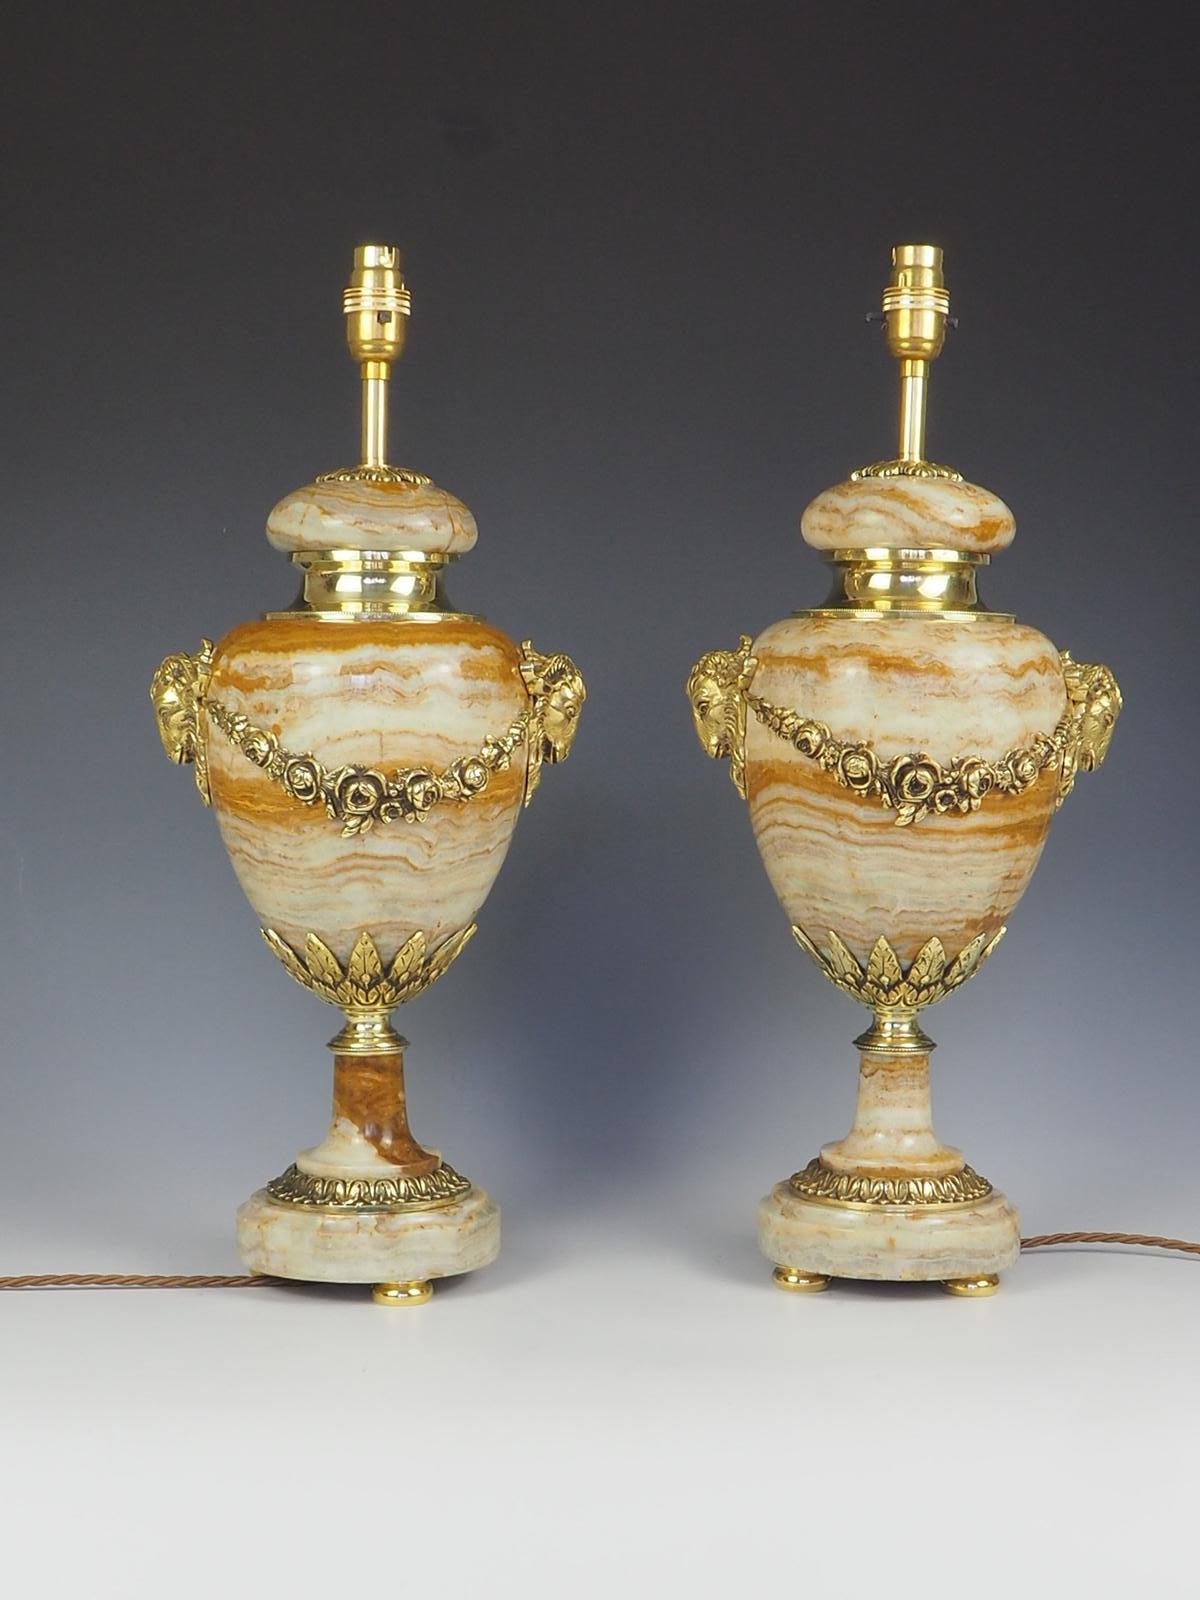 19th Century Antique Pair of French Ormolu Cassolette Marble Table Lamps For Sale